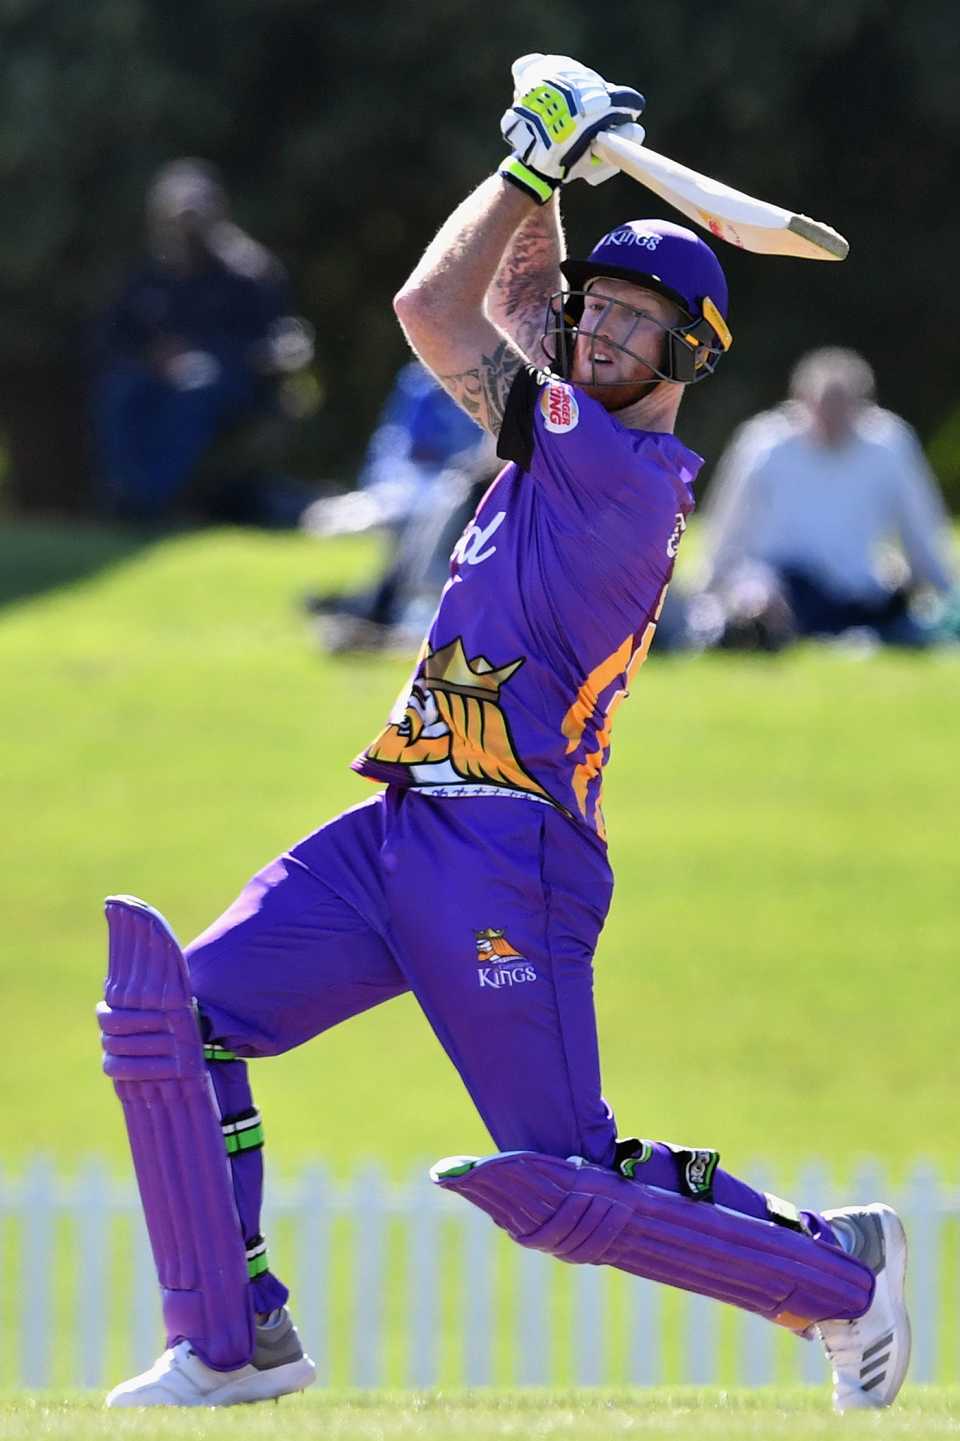 Ben Stokes drills the ball through the off side